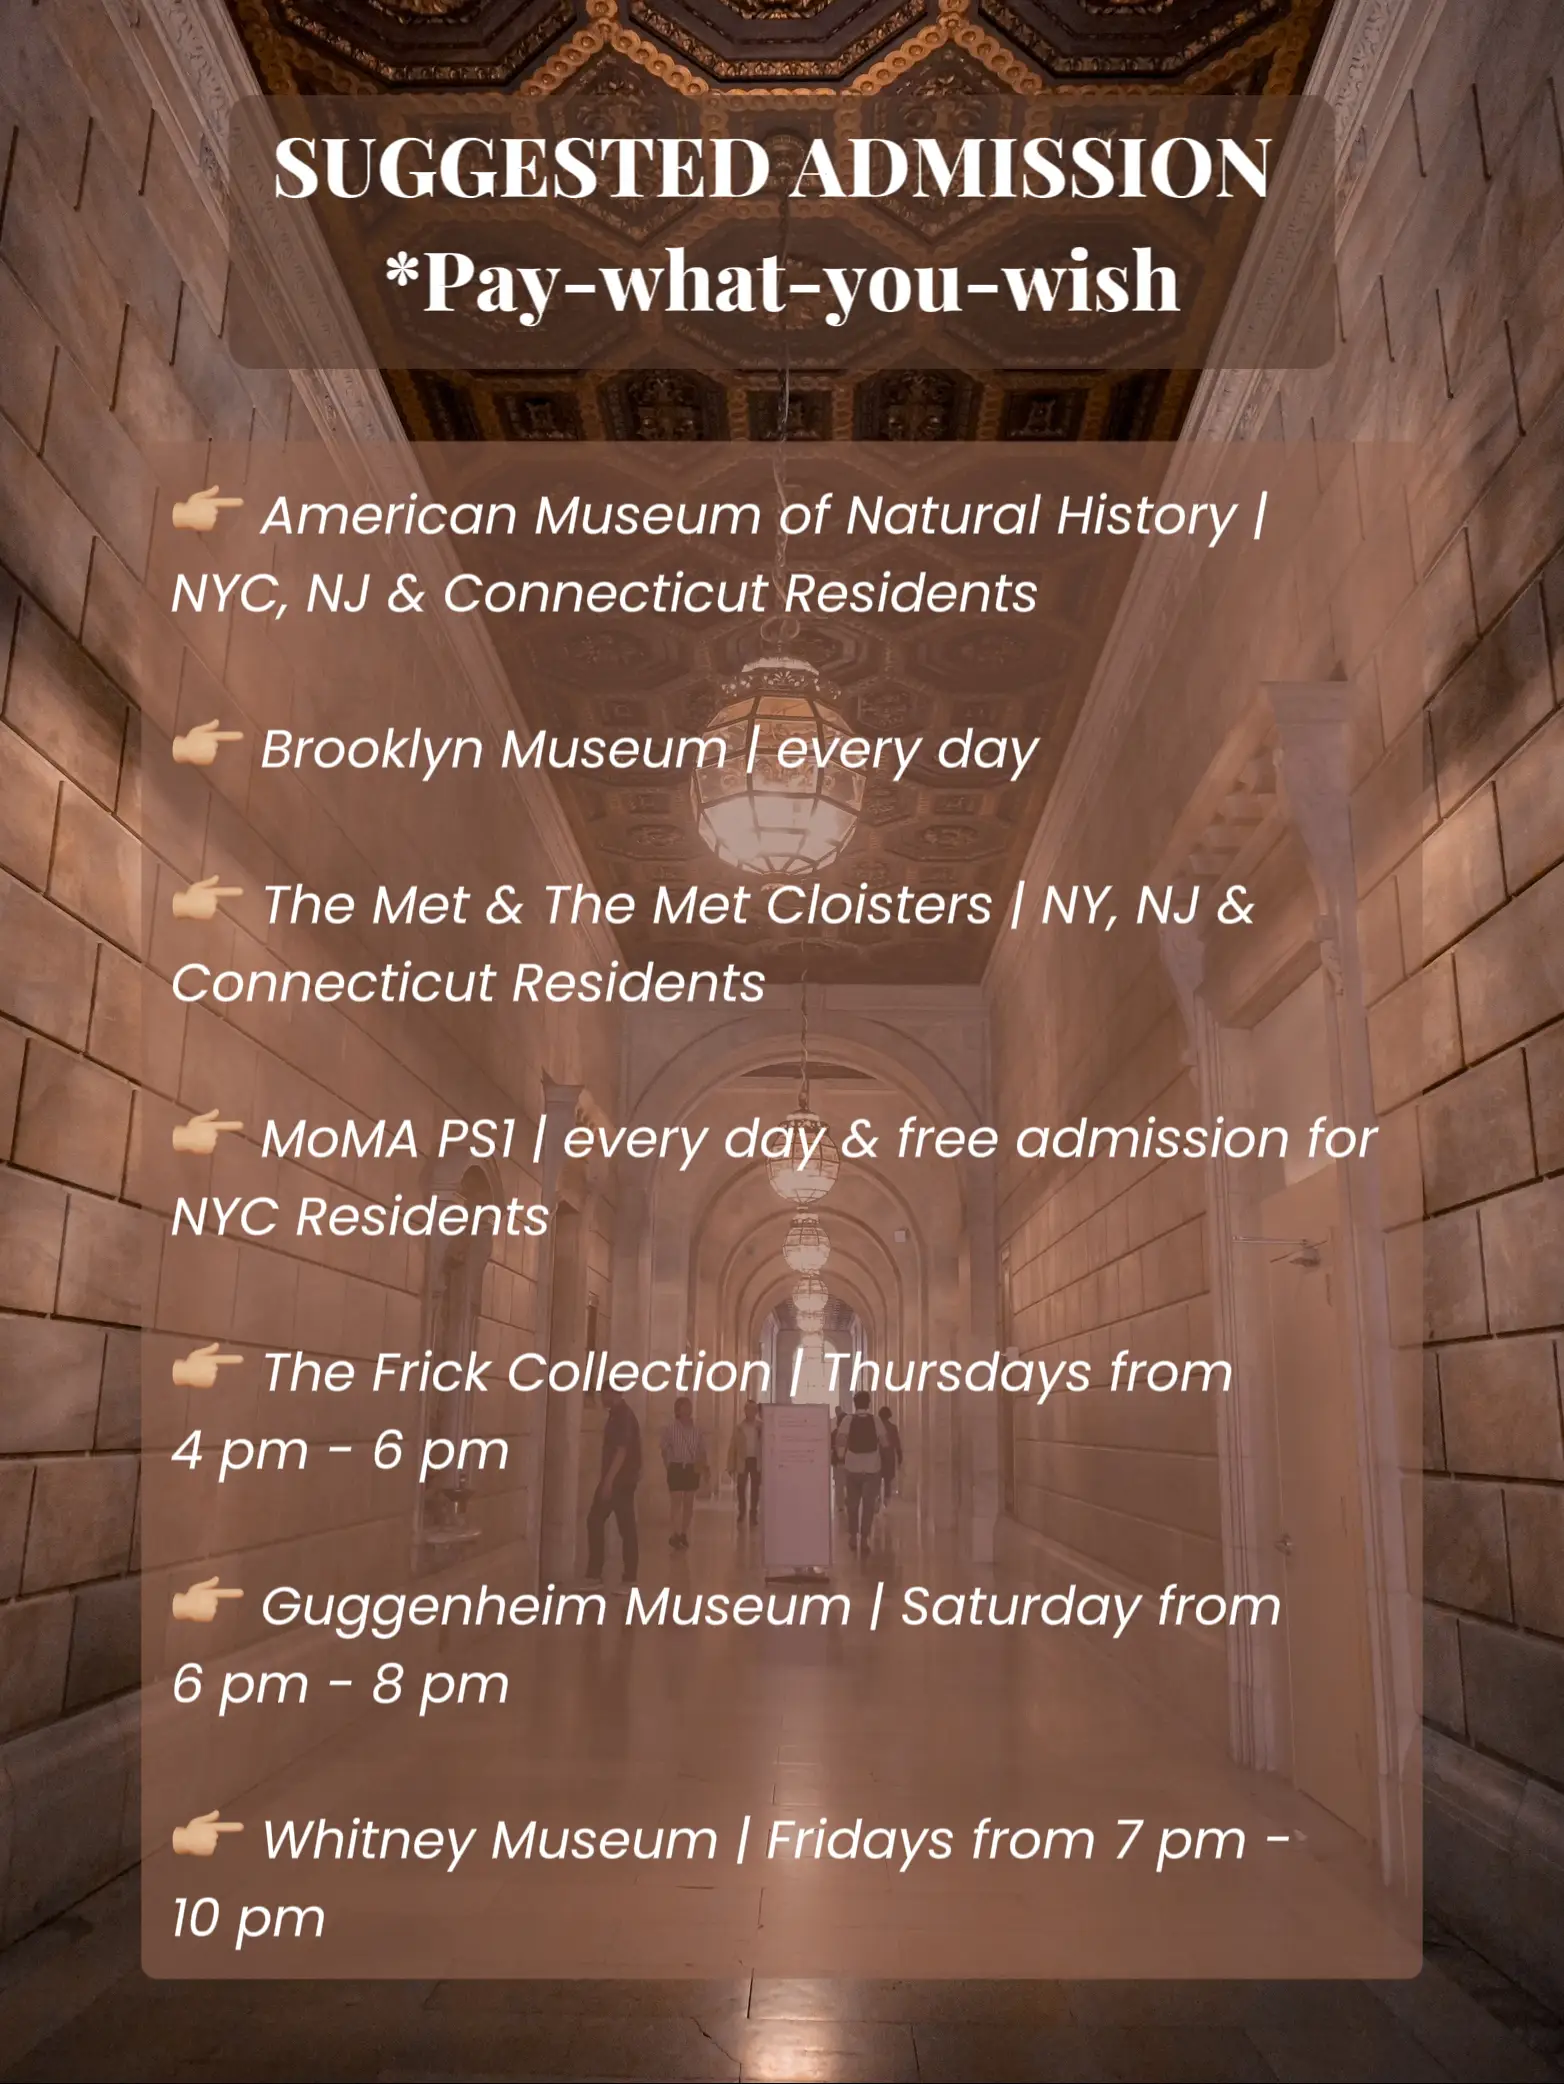  A list of suggested admissions for various museums in New York City.